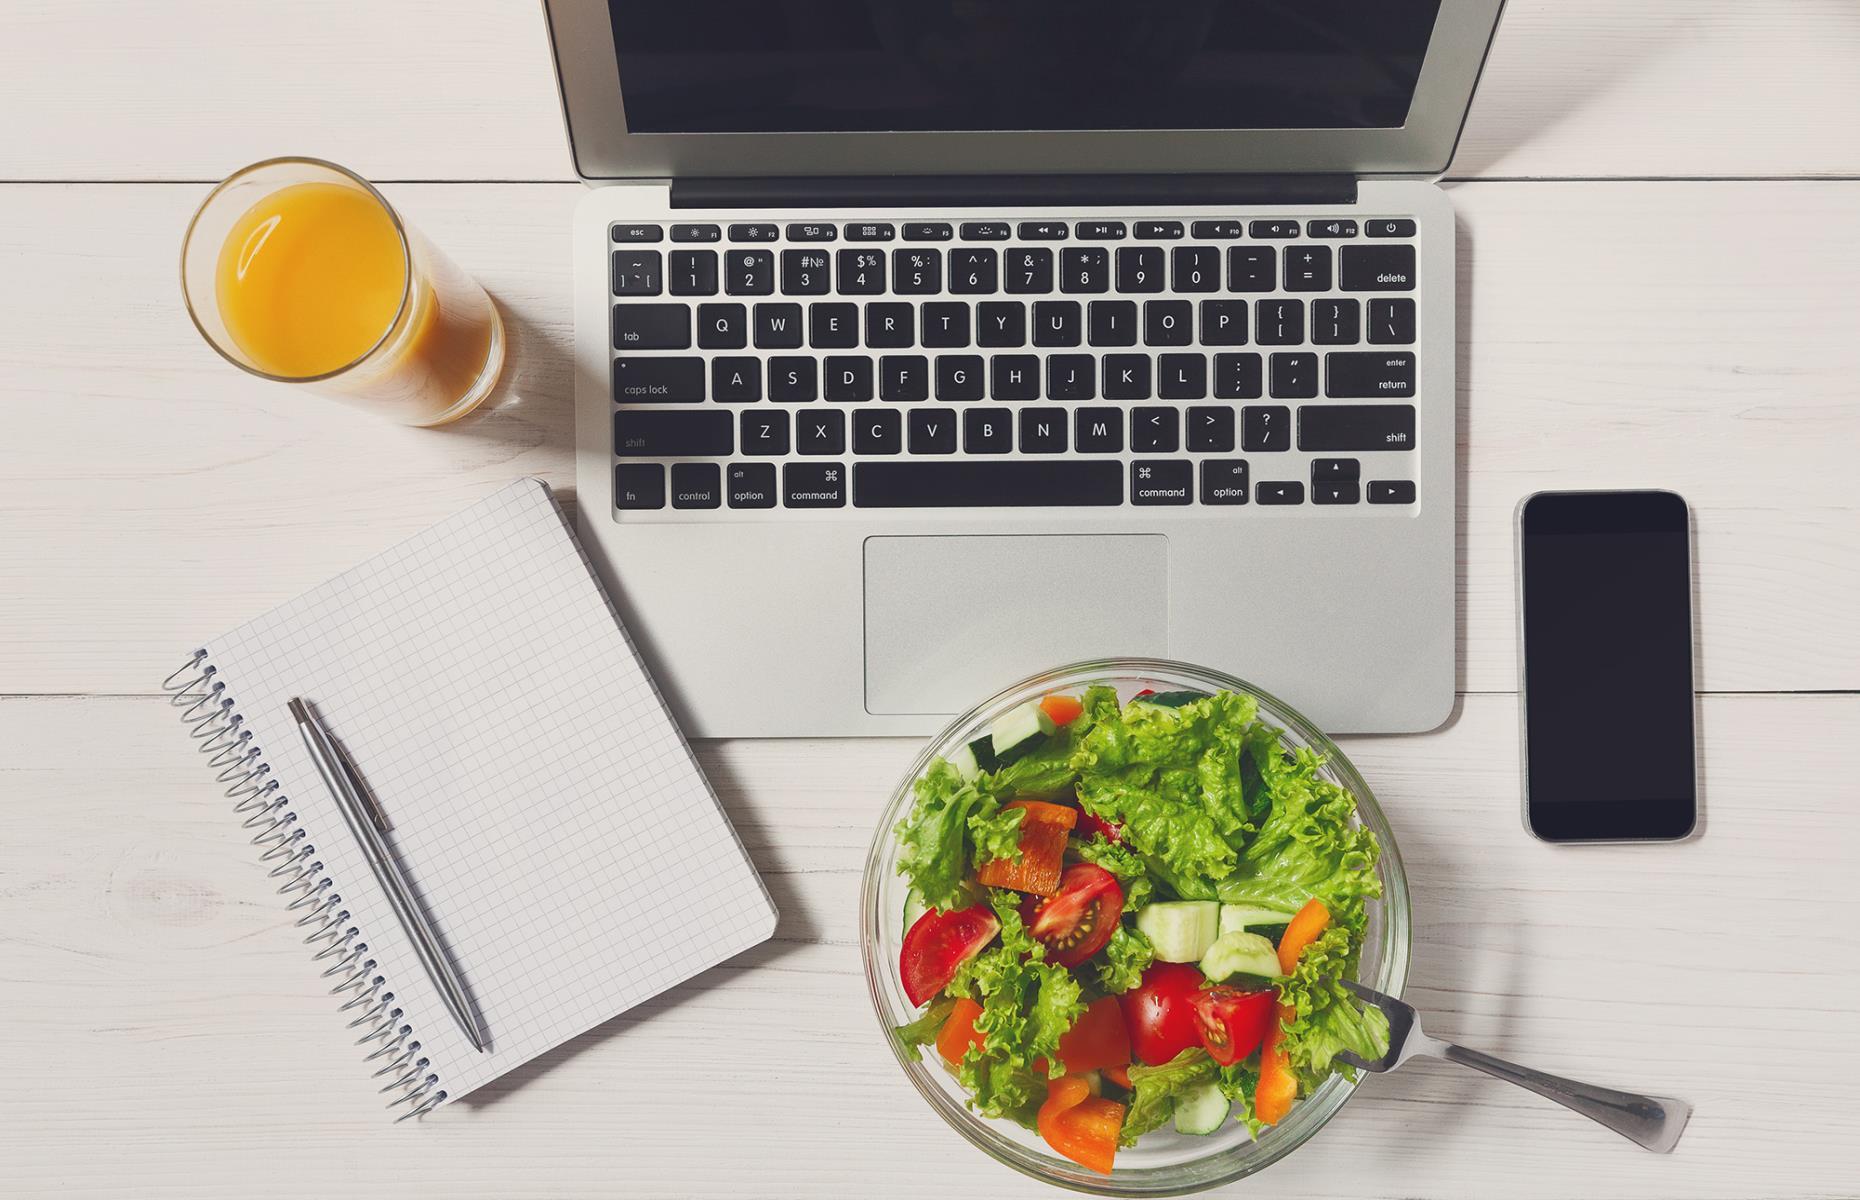 <p>A working lunch might seem a good idea when you're snowed under but <a href="http://ispub.com/IJPH/1/2/5611">research</a> has shown that crumbs and other food bits transferred to your keyboard create a breeding ground for antibiotic-resistant bacteria like Staphylococcus aureus and E.coli. Not to mention that your computer will be likely completely ruined if you drop a drink on it. Take food outside or to a communal space – not least to get some air and take a break.</p>  <p><strong><a href="https://www.lovefood.com/galleries/70590/60-food-hacks-that-are-borderline-genius?page=1">These 60 kitchen hacks are borderline genius</a></strong></p>